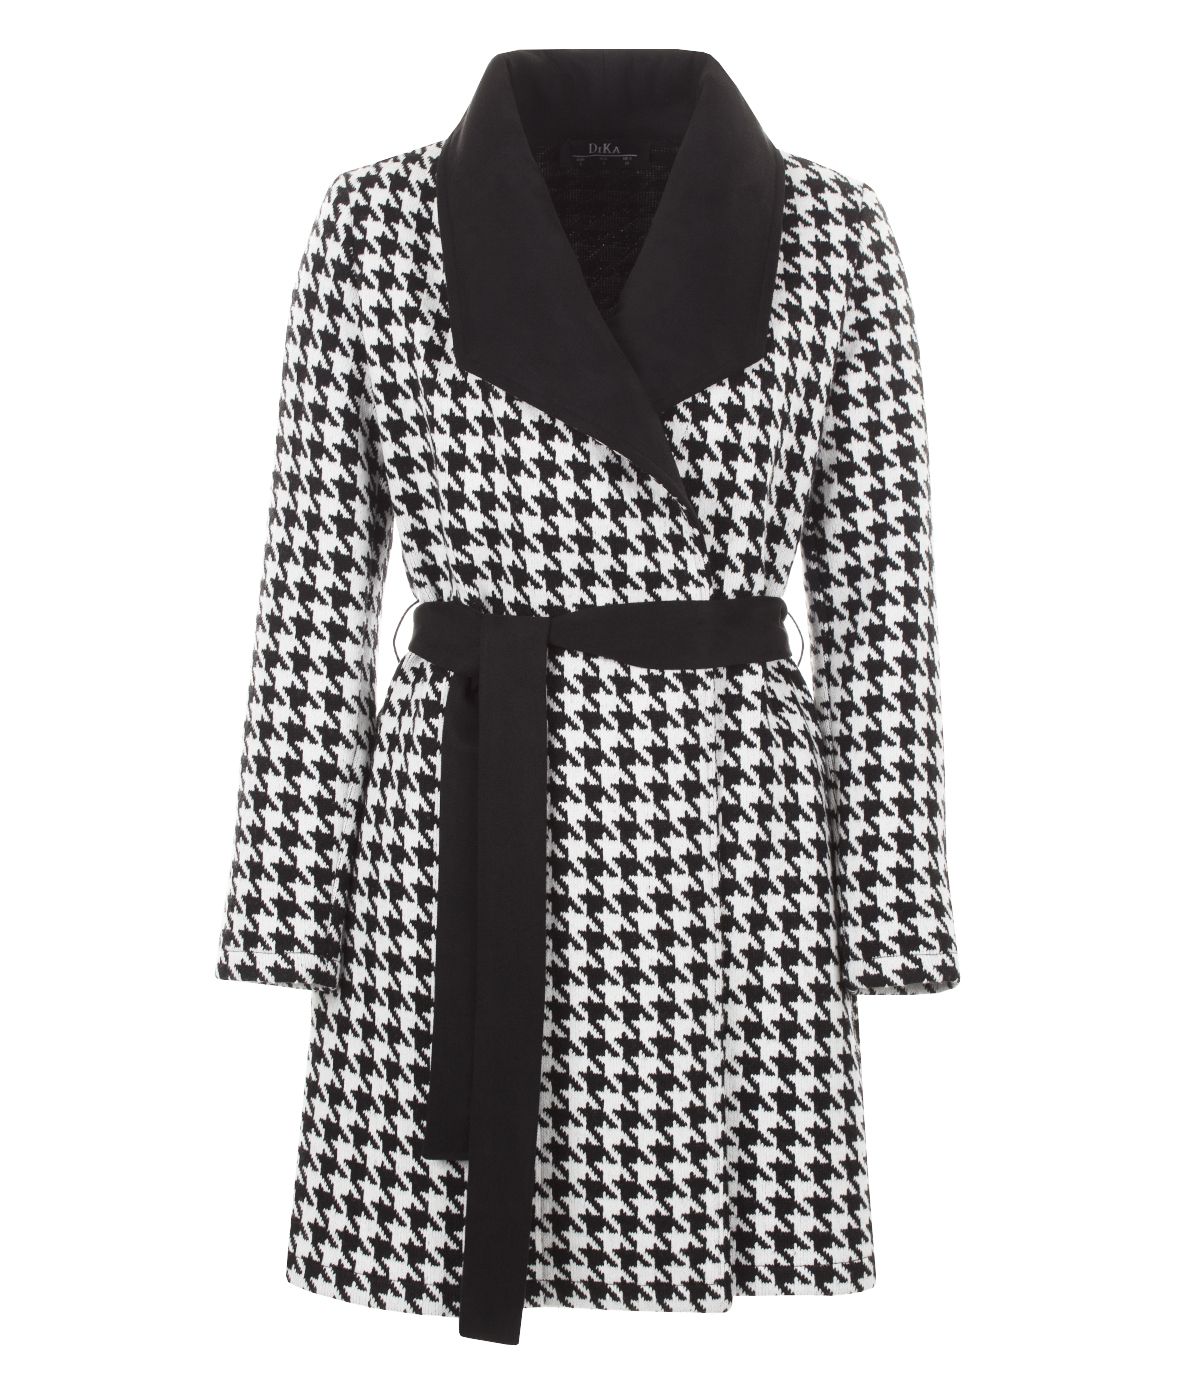 Acrylic wrap-around jacket with contrasting belt and lapel and houndstooth print 0